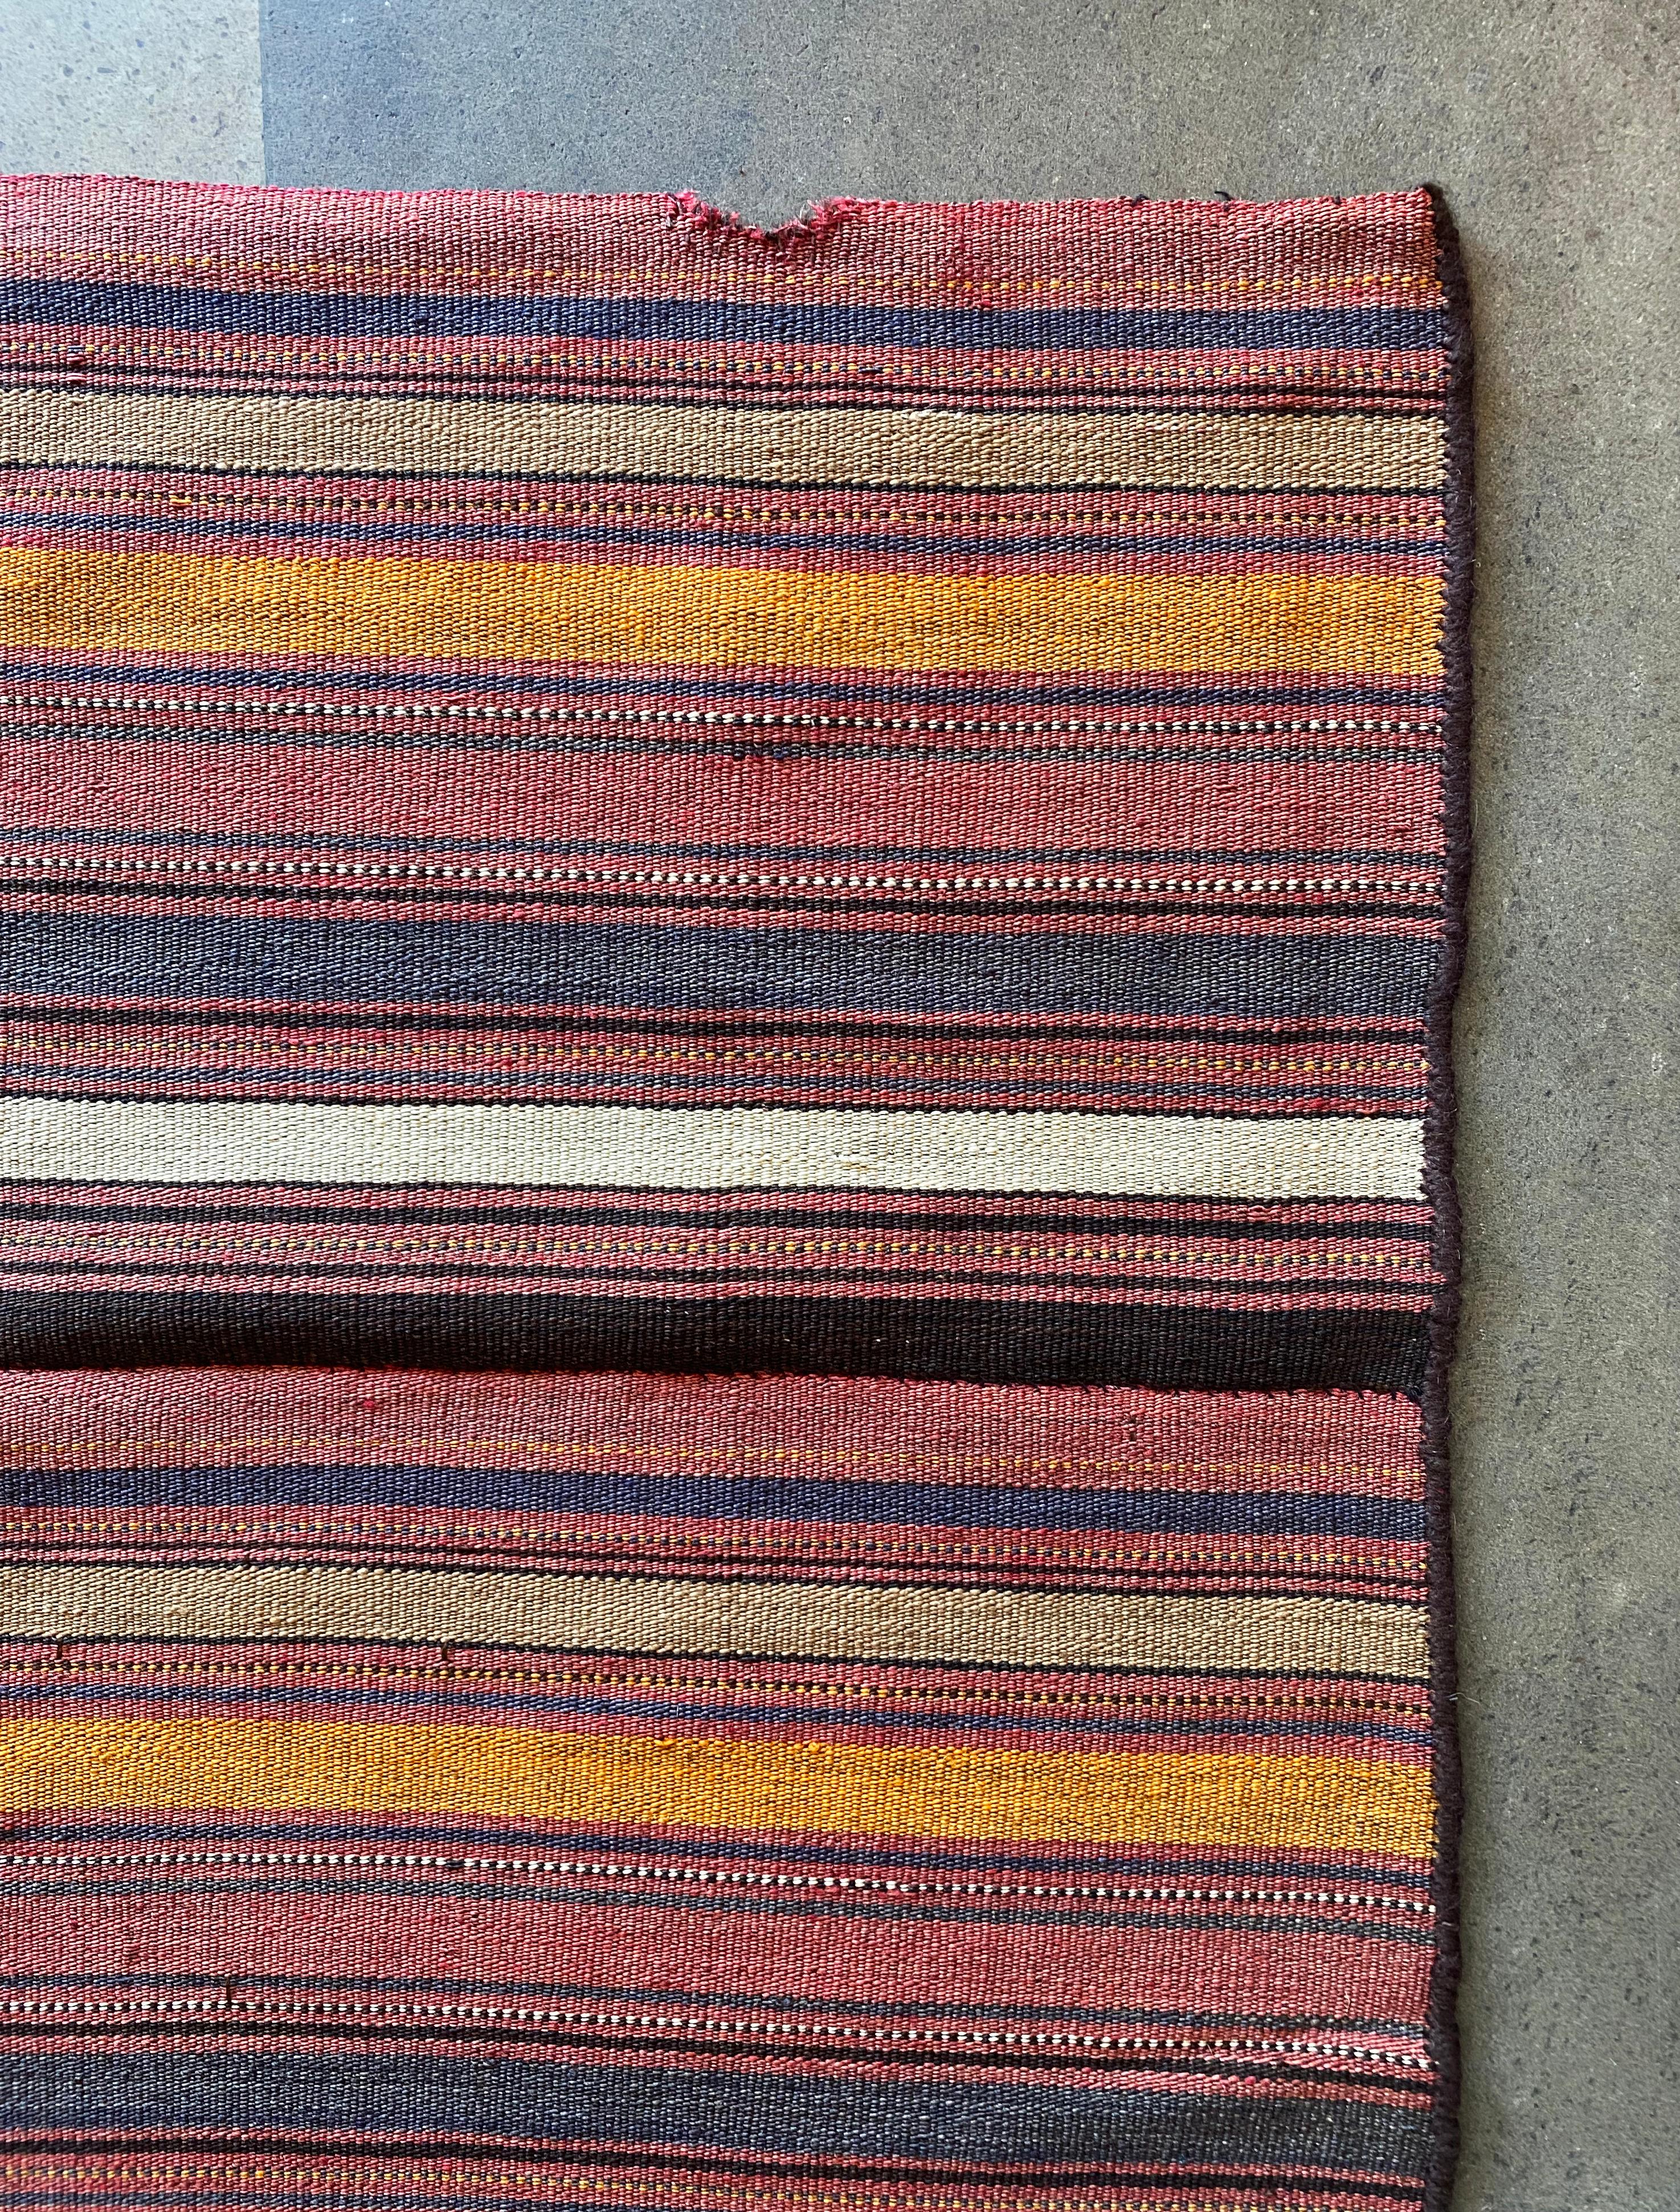 Striped, Multicoloured Turkish Wool Kilim Rug, Early 20th Century For Sale 1